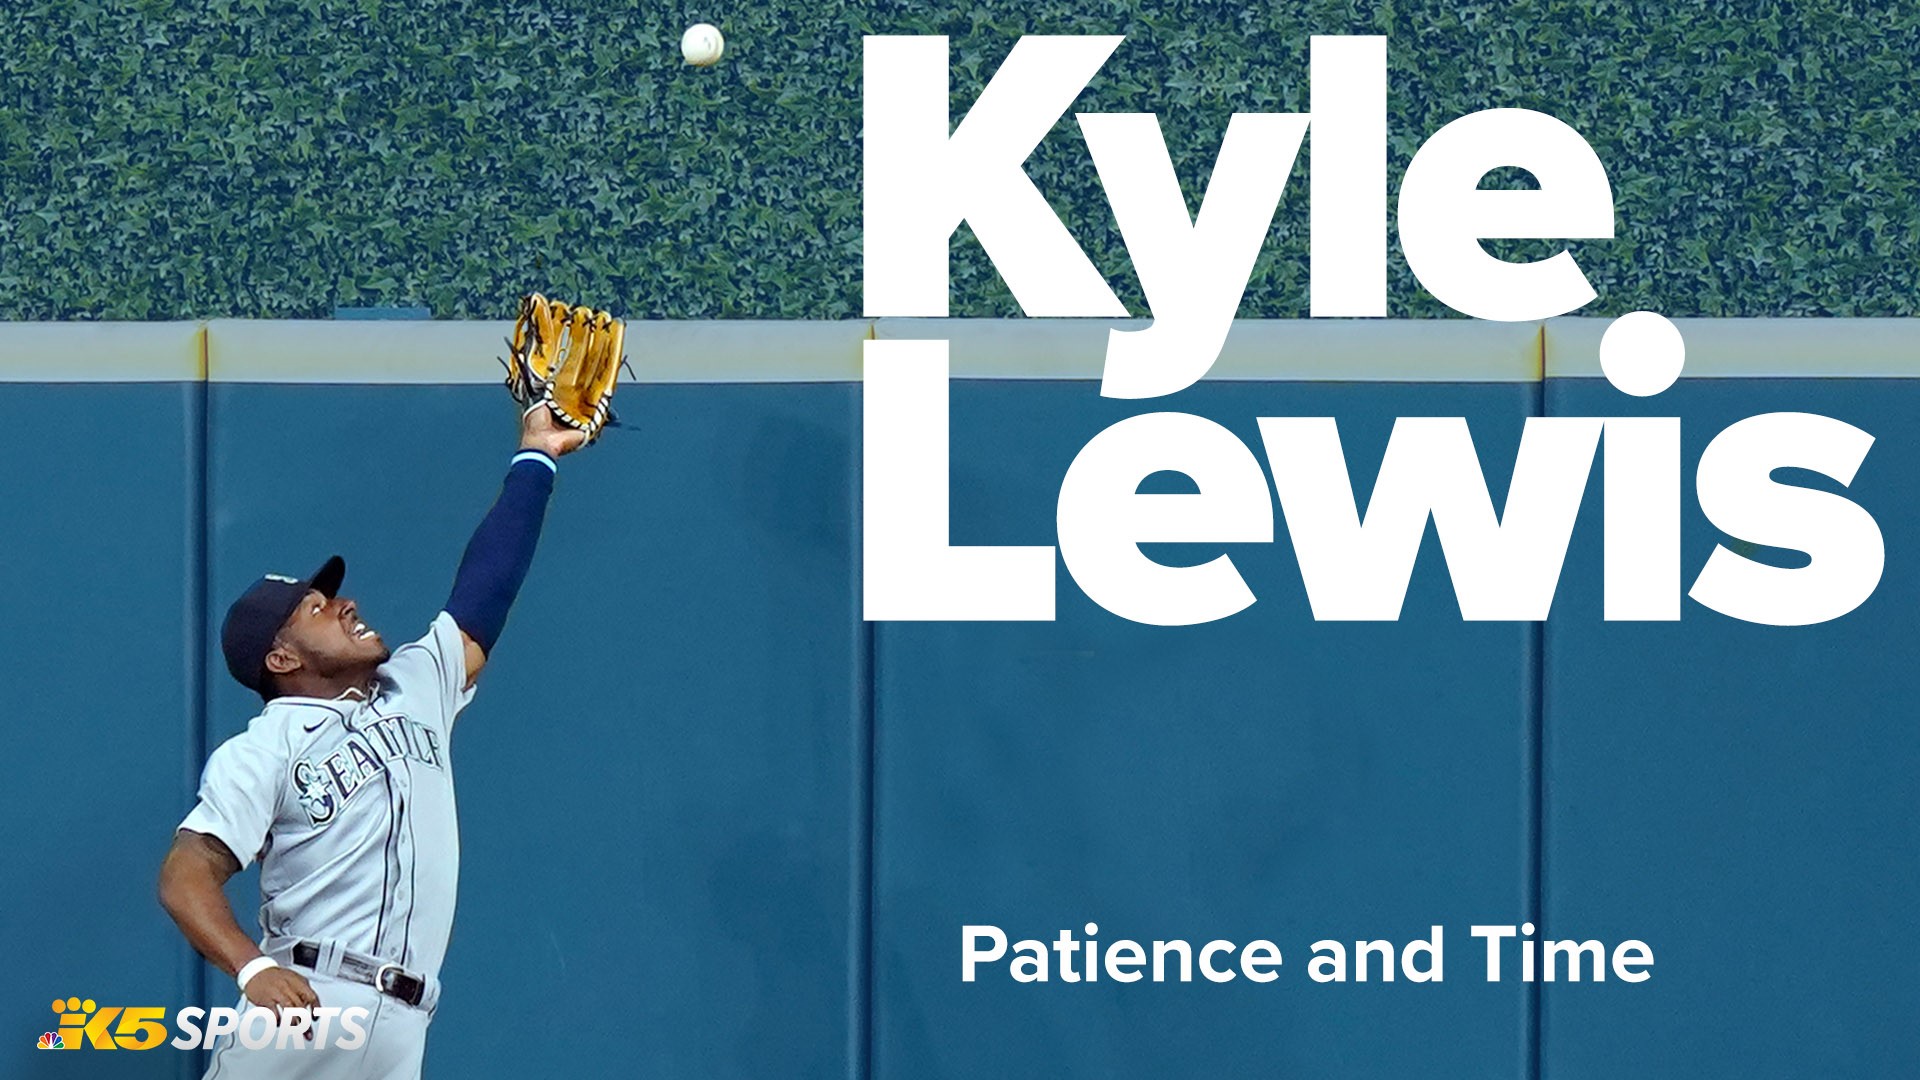 Seattle Mariners center fielder Kyle Lewis is returning from another injury.  He wants to get back to help his teammates win, but he's learning patience.